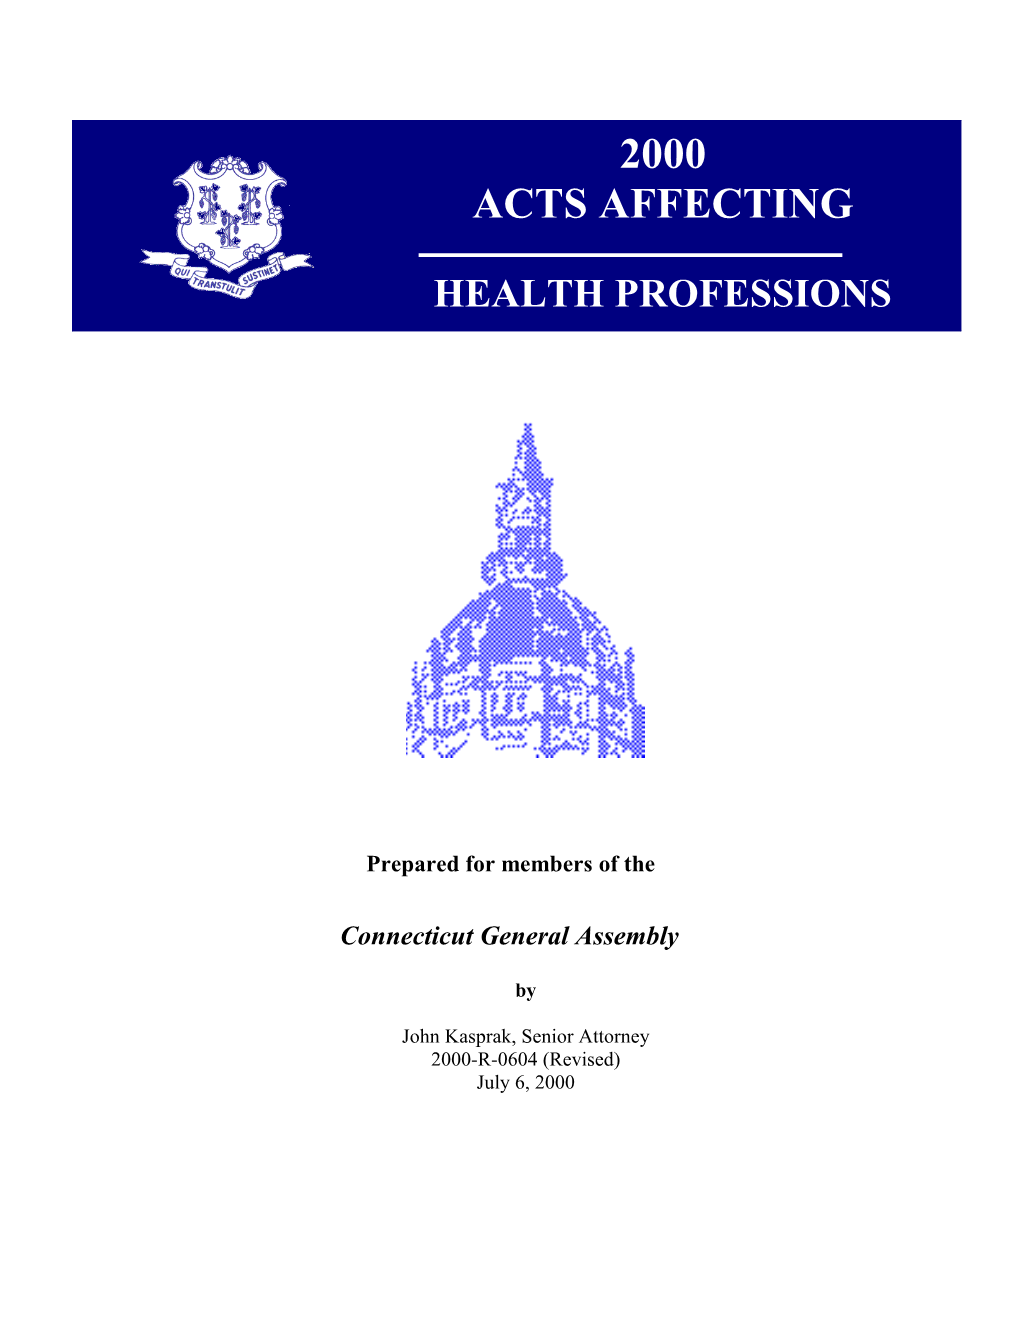 Acts Affecting Health Professions